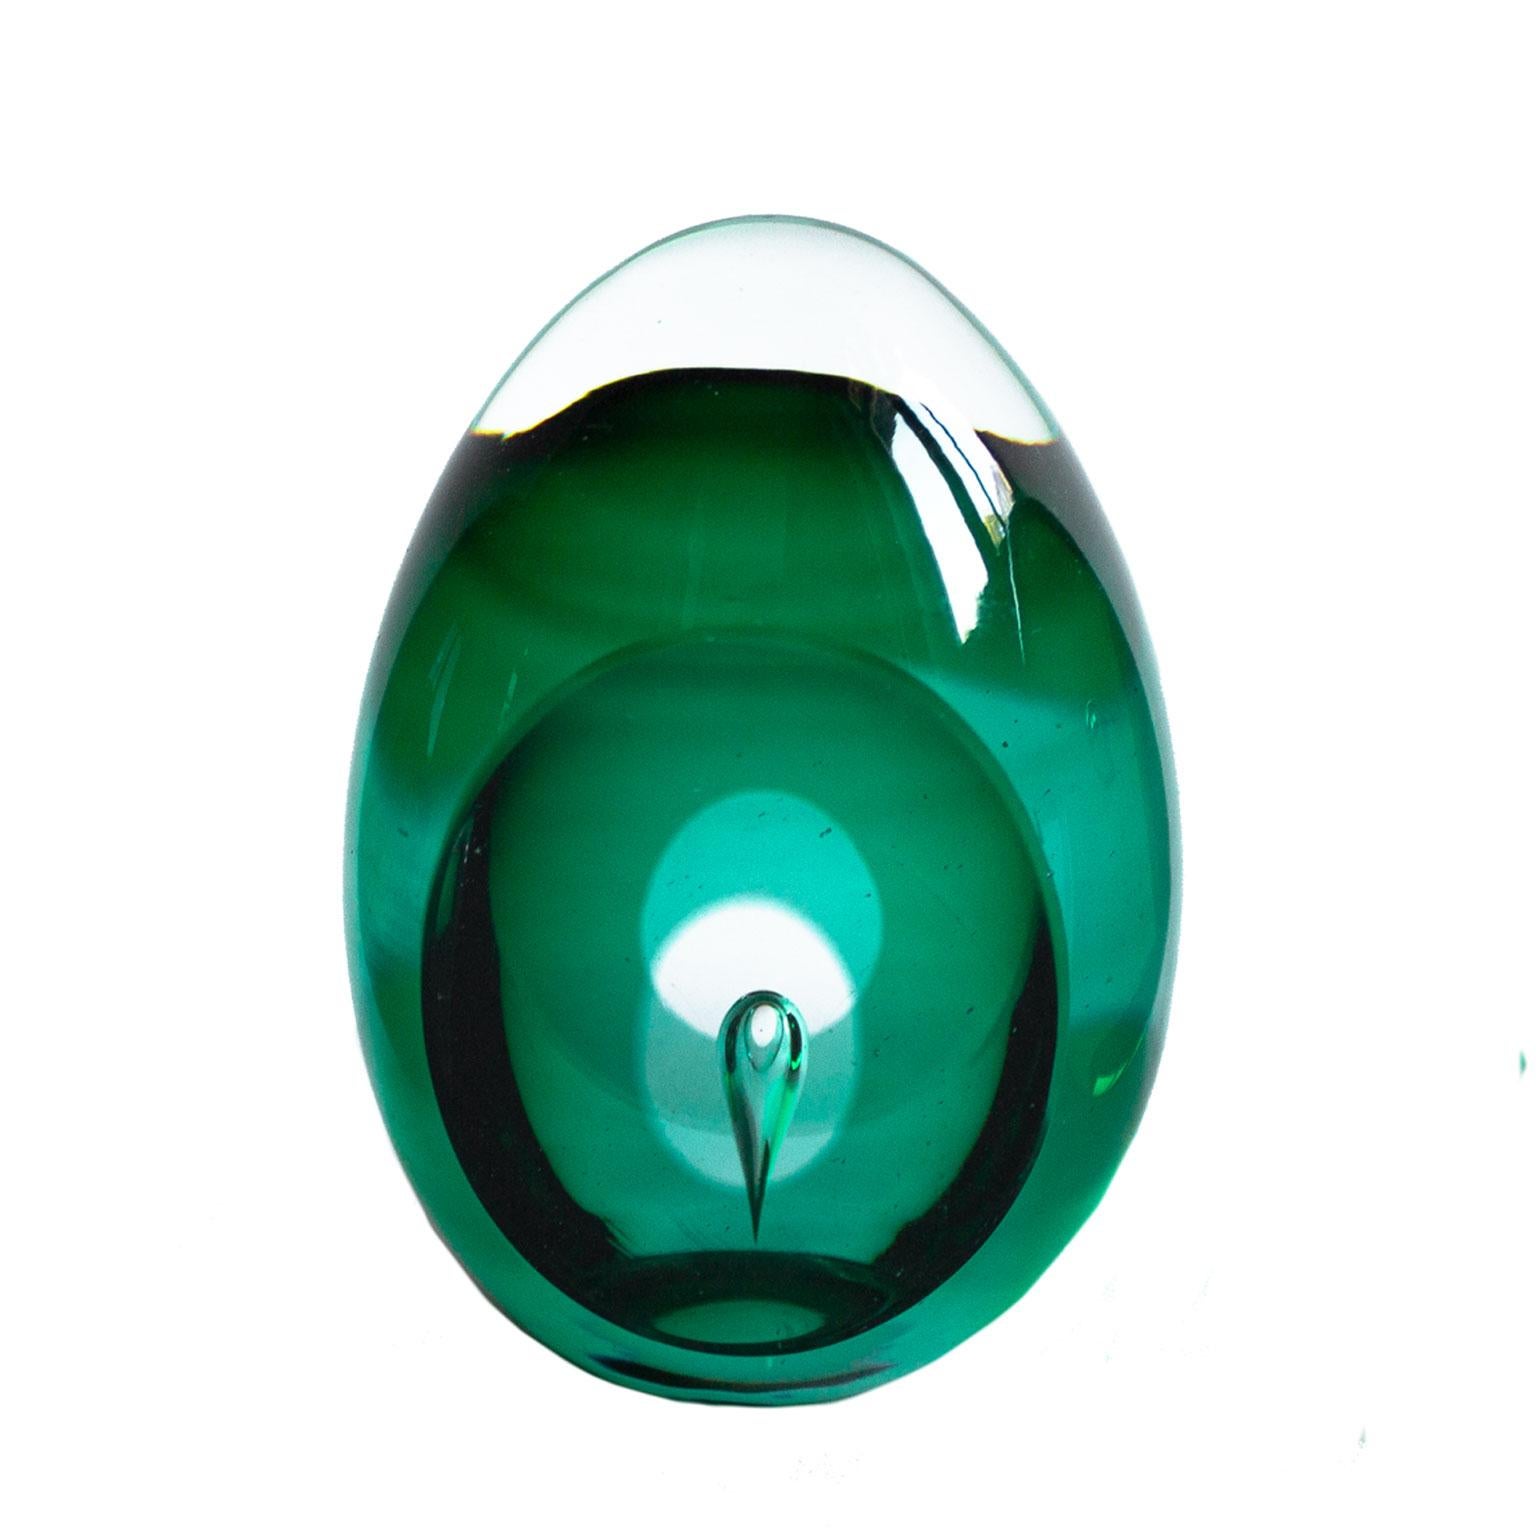 Scandinavian Modern glass sculpture signed by Mona Morales-Schildt for Kosta. Two green paperweights/sculptures. Both with a bubble in the middle. The inspiration comes from Paolo Veninis bright colors.
Morales has also been working as an ceramist